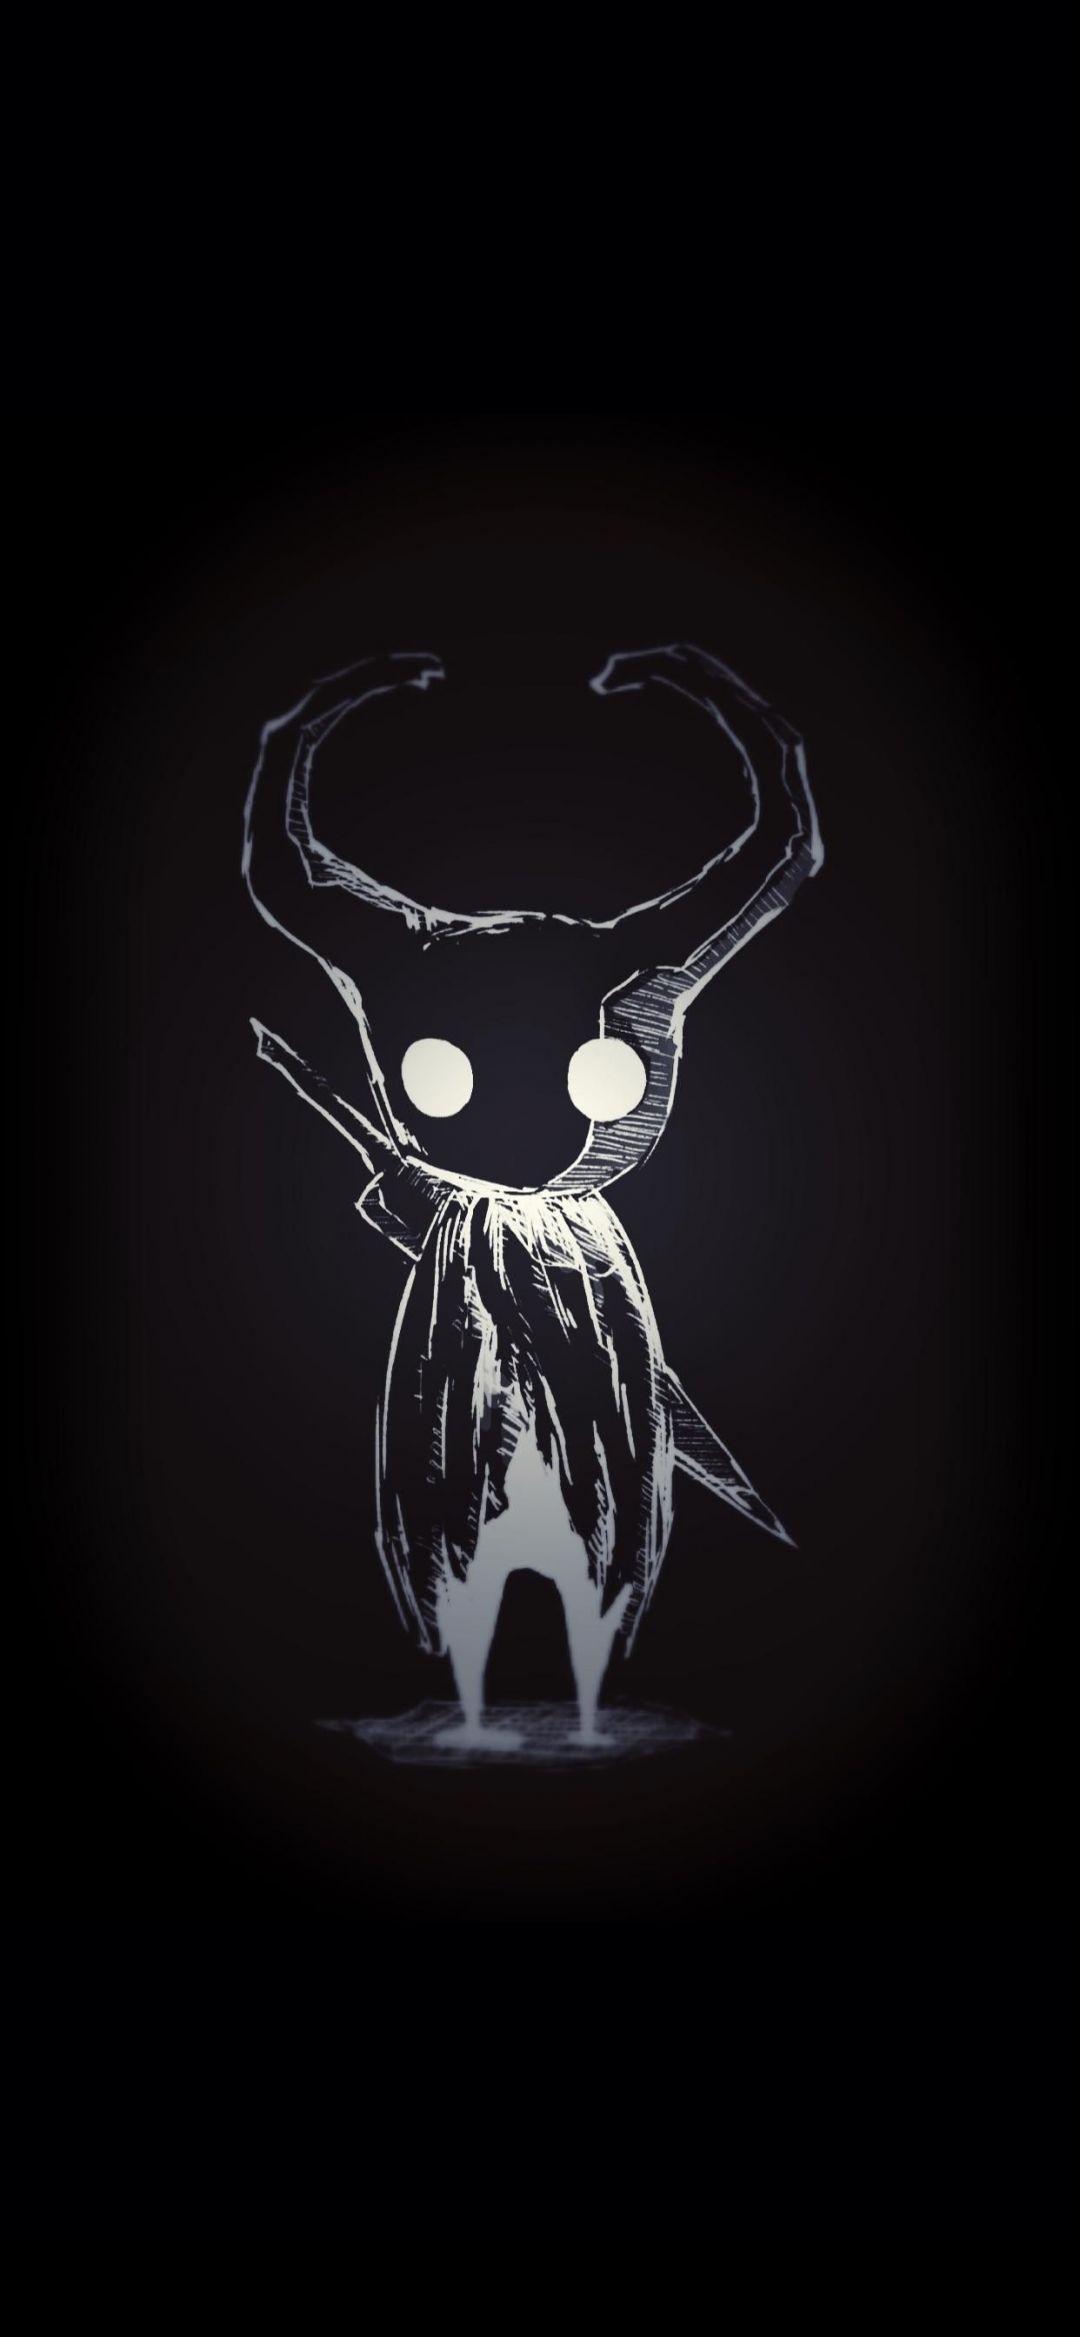 1080 x 2337 · jpeg - [45+] Hollow Knight - Android, iPhone, Desktop HD Backgrounds ...